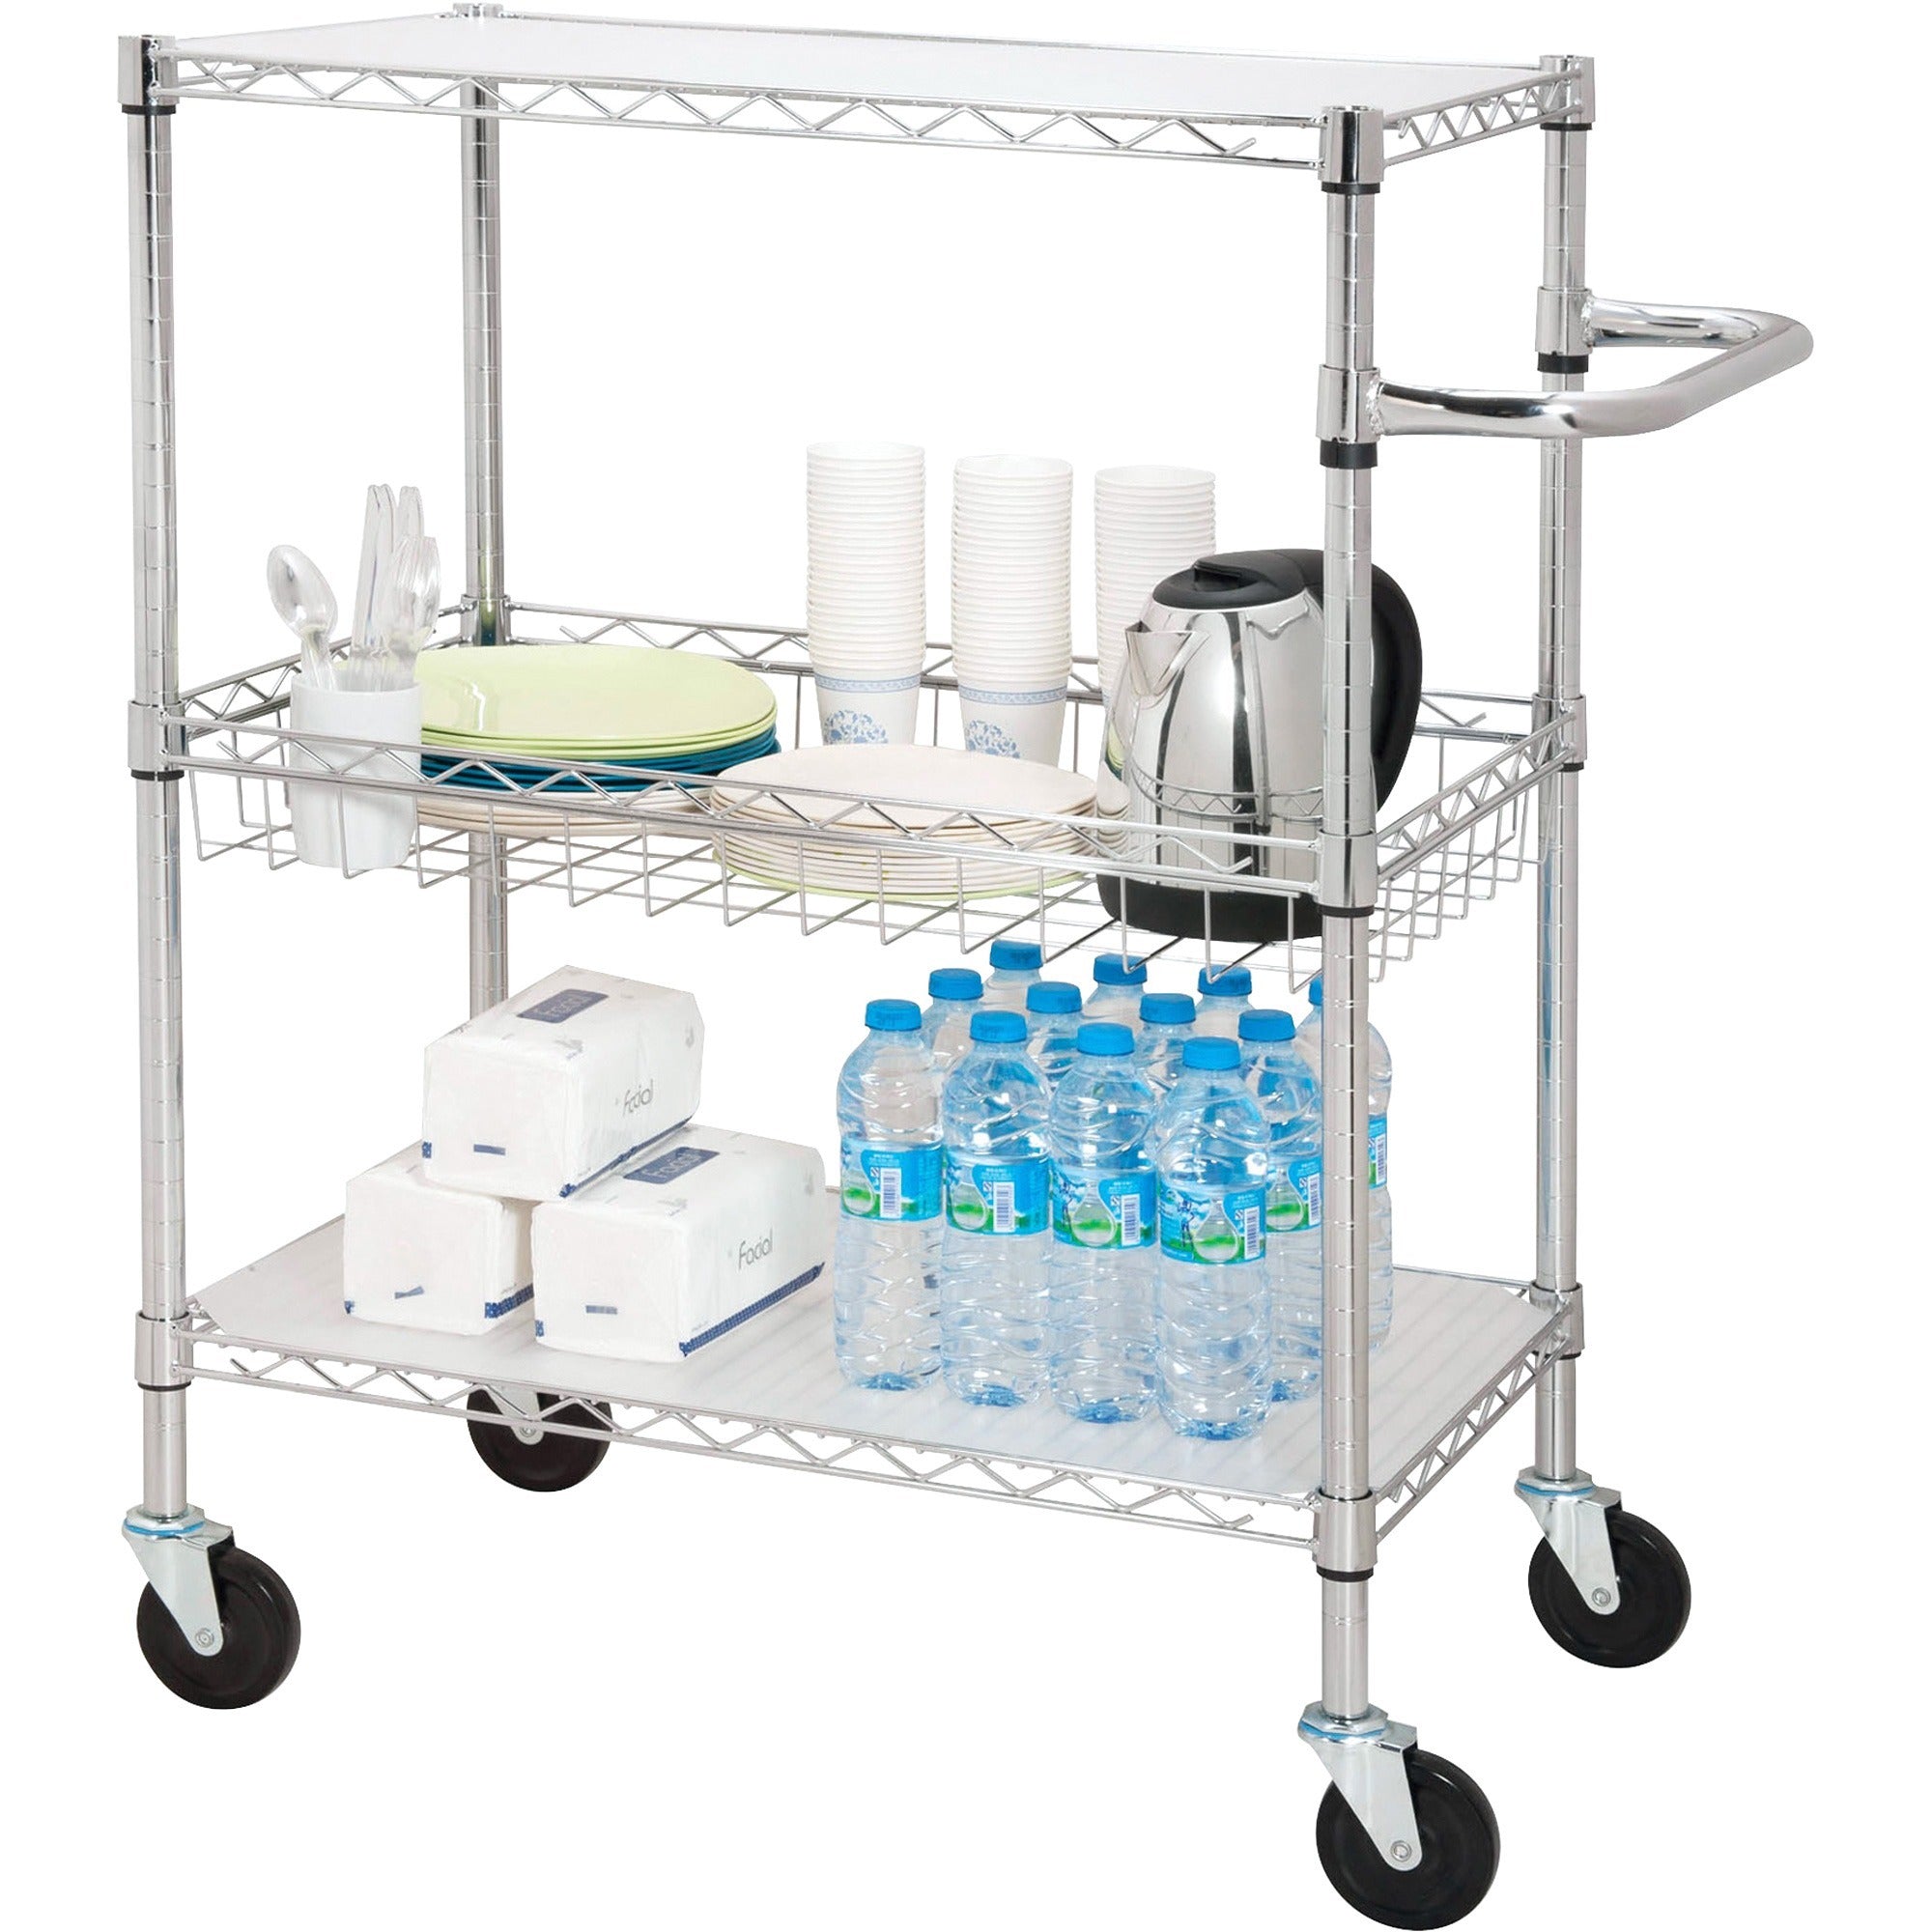 Lorell 3-Tier Rolling Cart - 99 lb Capacity - 4 Casters - Steel - x 18" Width x 30" Depth x 40" Height - Chrome - 1 Each - 